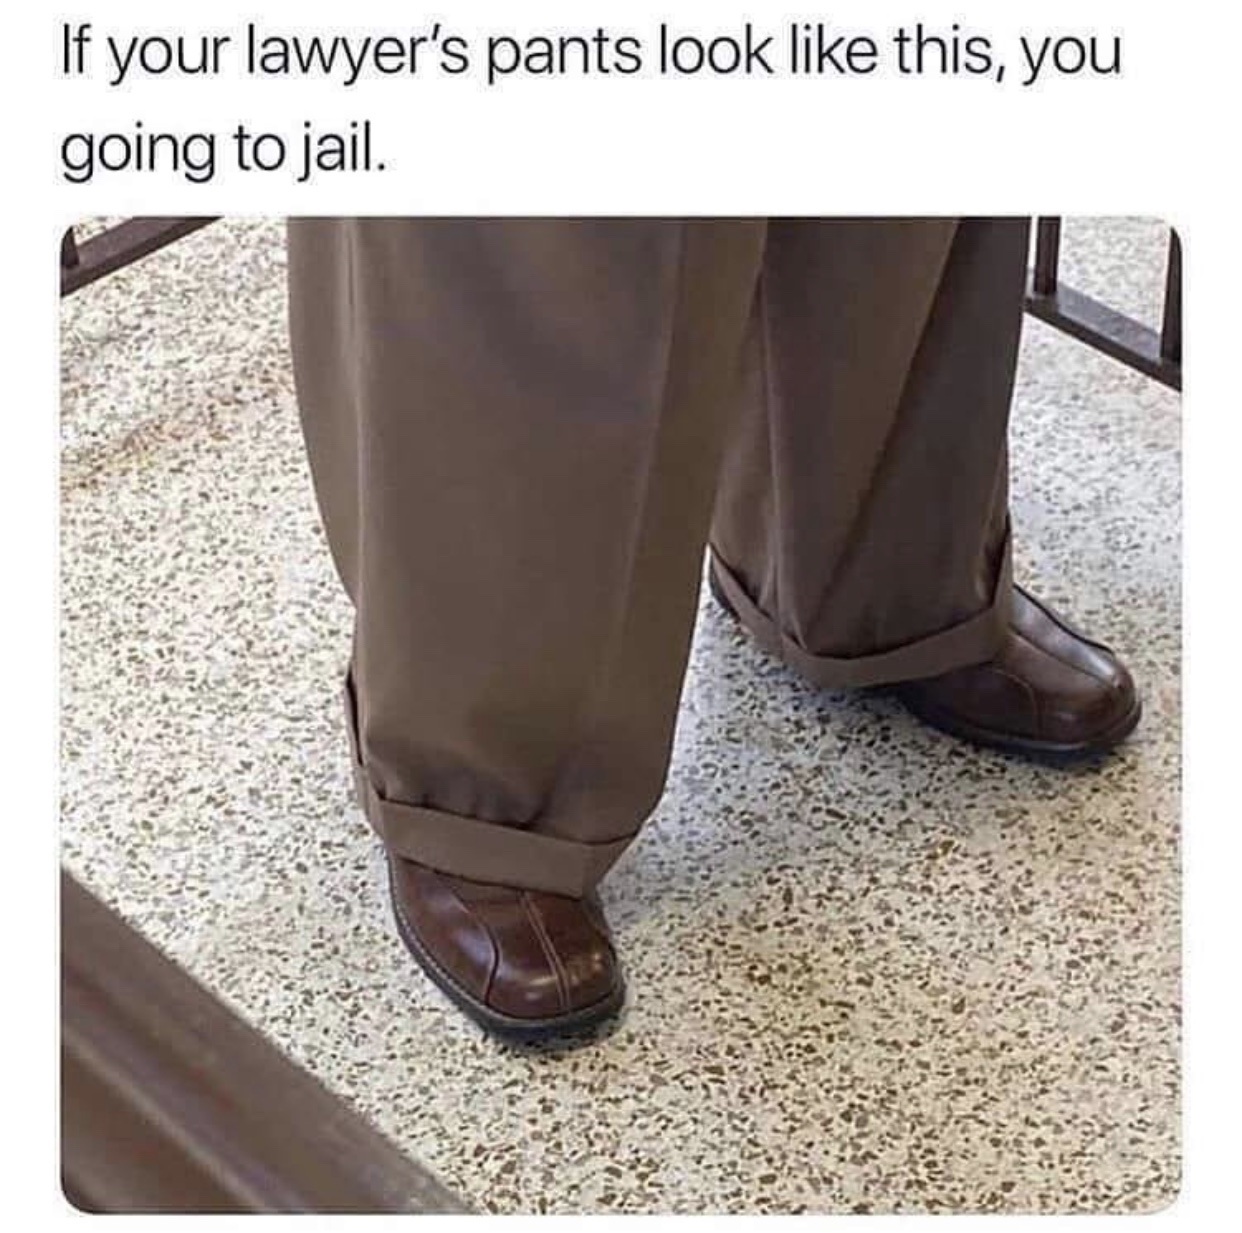 if your lawyers pants look like - If your lawyer's pants look this, you going to jail.